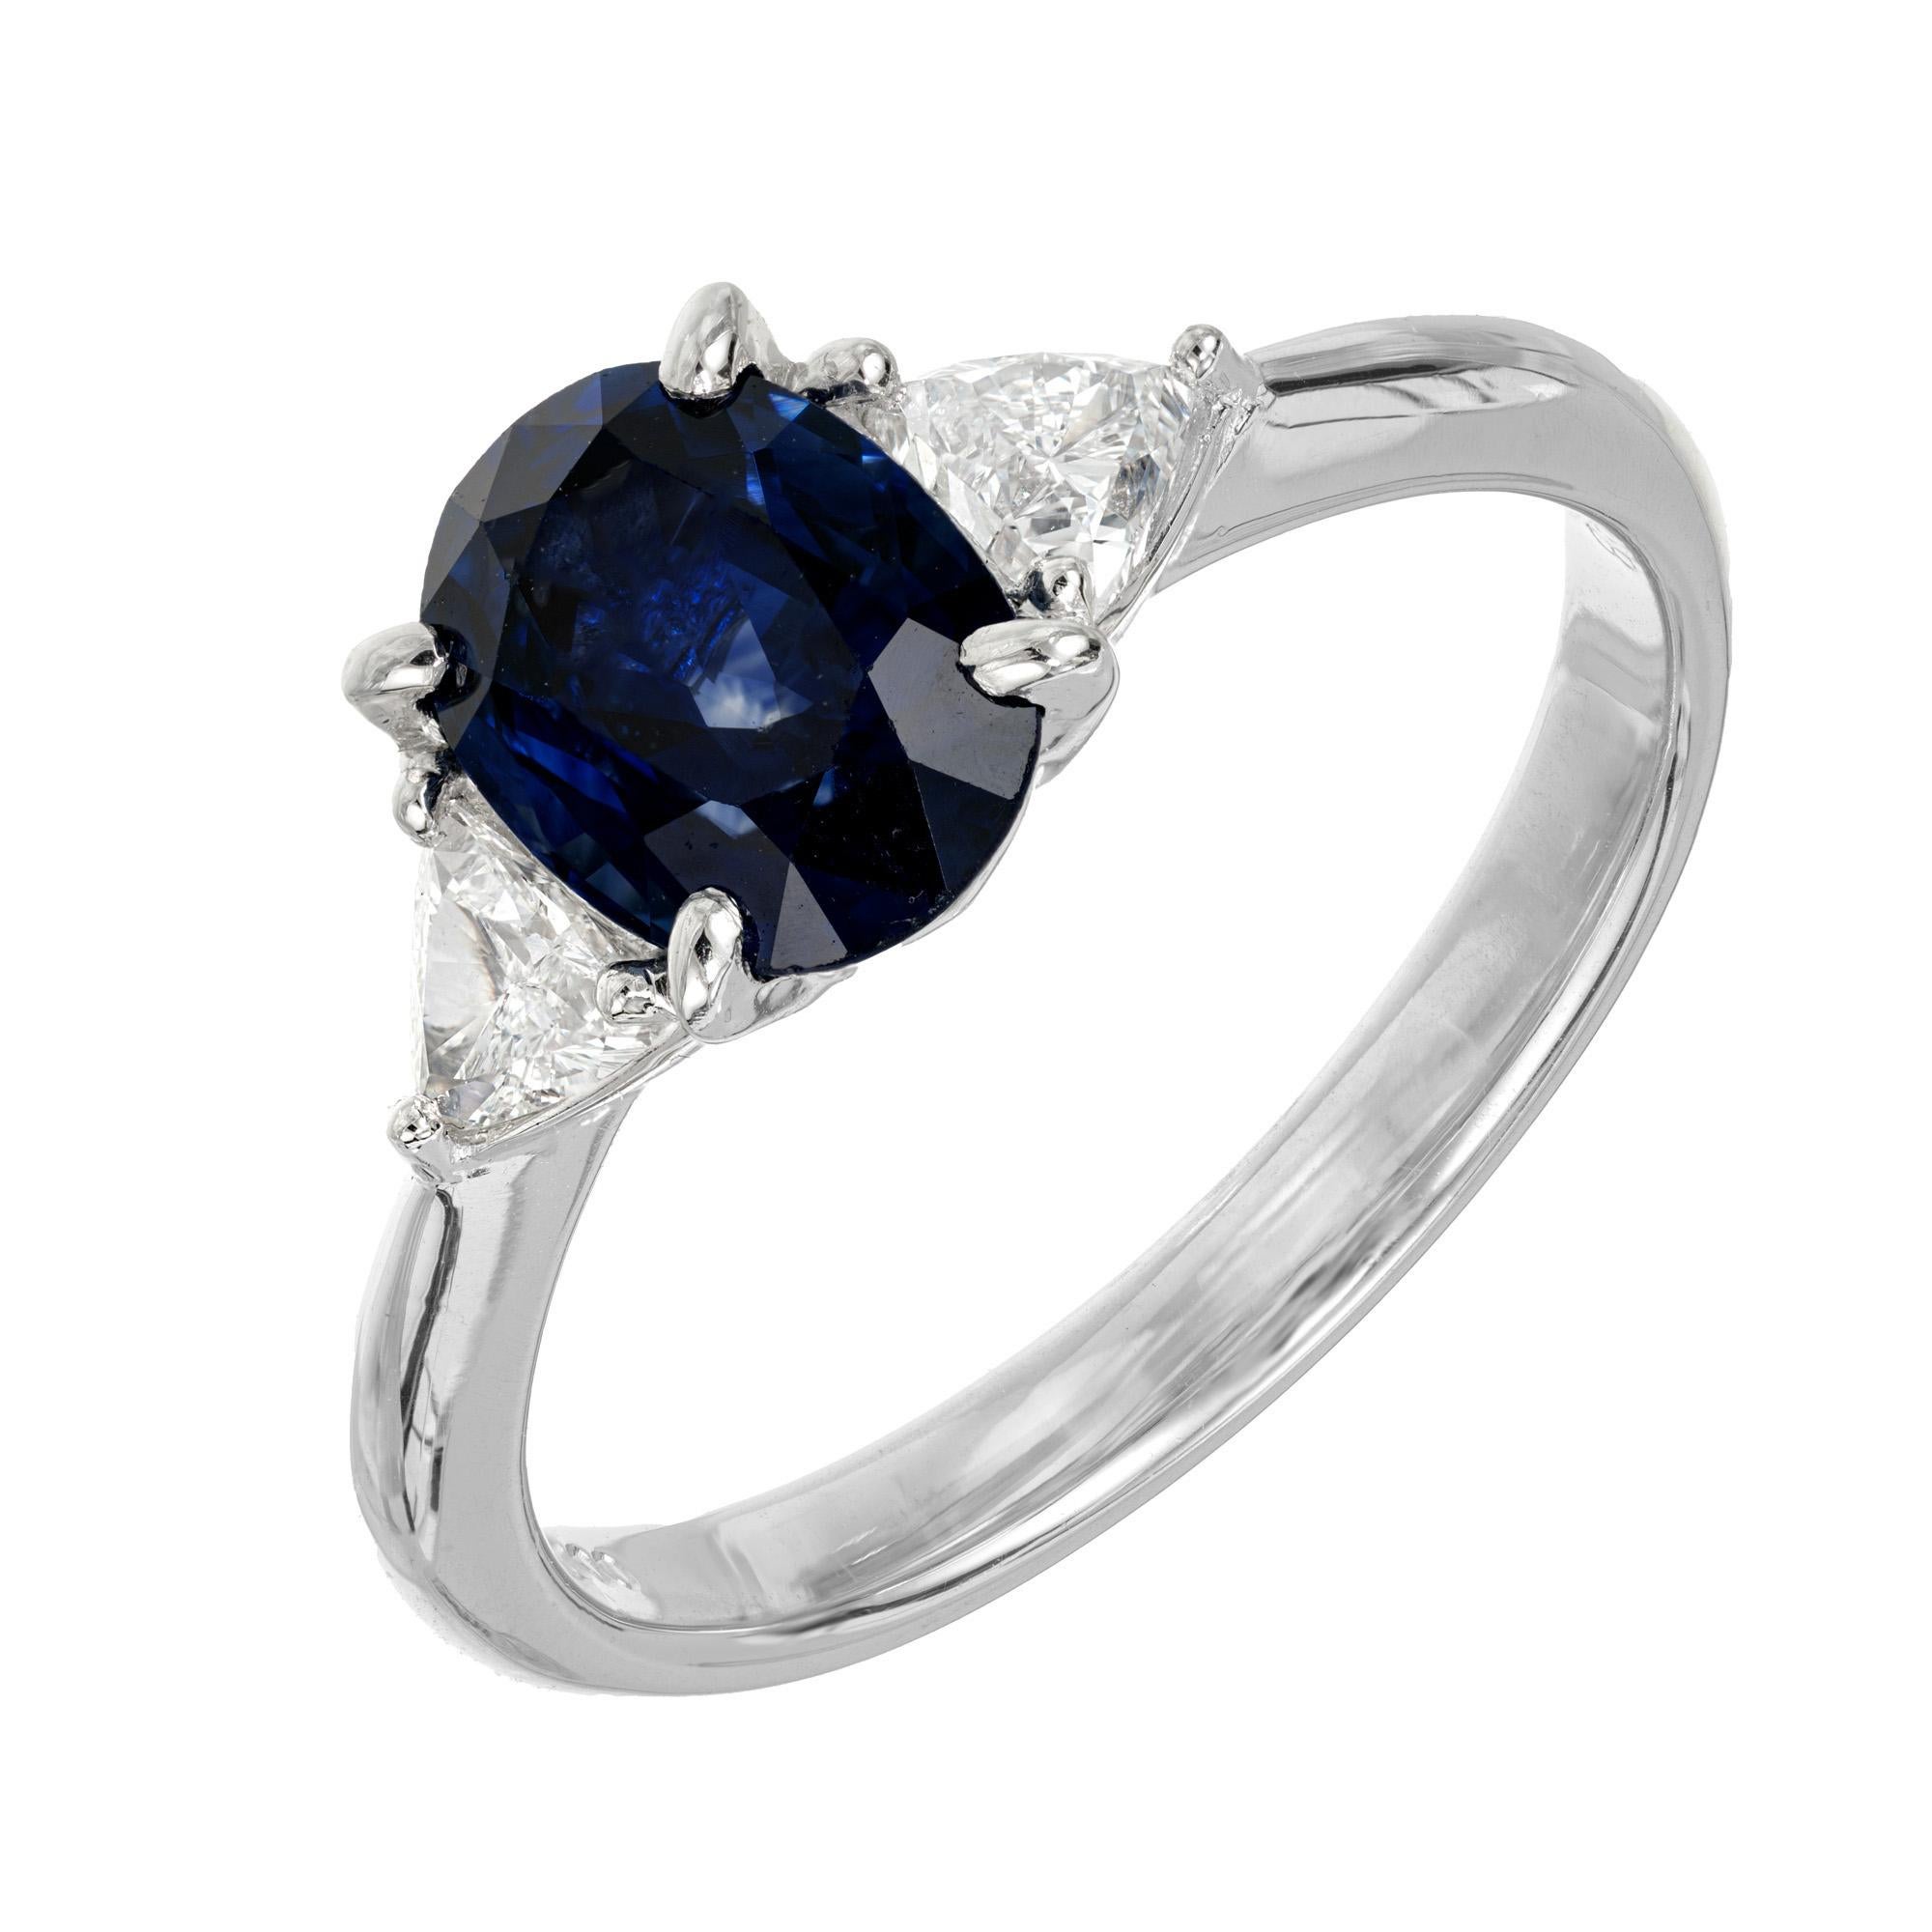 Deep blue sapphire and diamond engagement ring. GIA certified oval 1.85 carat blue sapphire center stone set in a platinum three-stone setting with 2 G-H (near colorless) trilliant cut side diamonds. The sapphire is simple heat only.  

1 oval blue